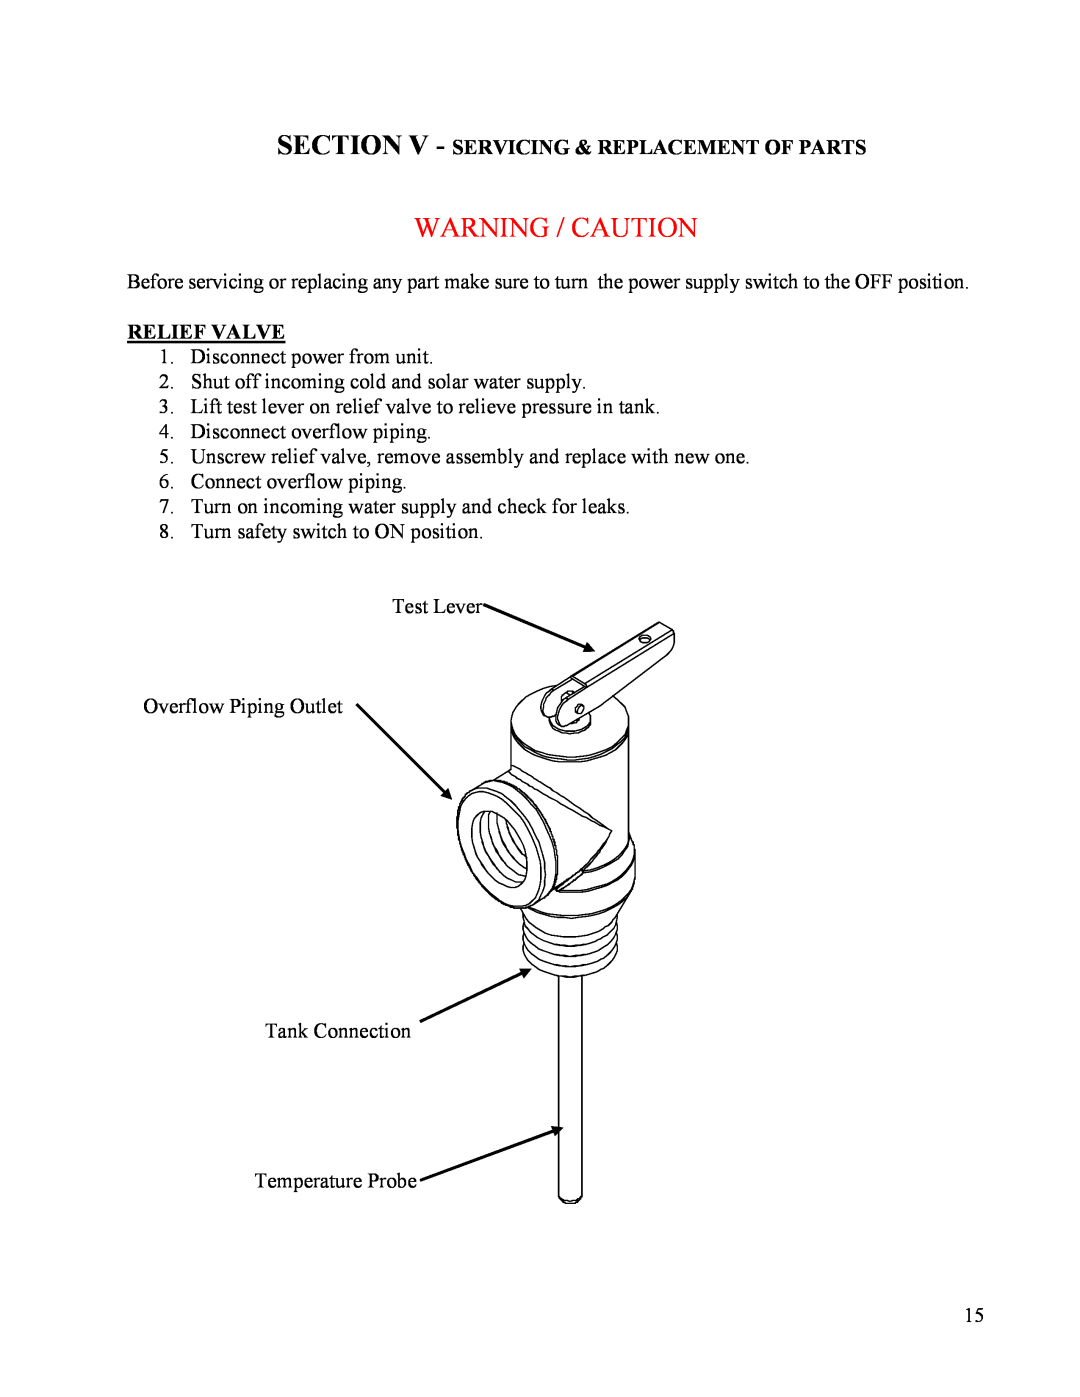 Hubbell Electric Heater Company SLN manual Section V - Servicing & Replacement Of Parts, Relief Valve, Warning / Caution 